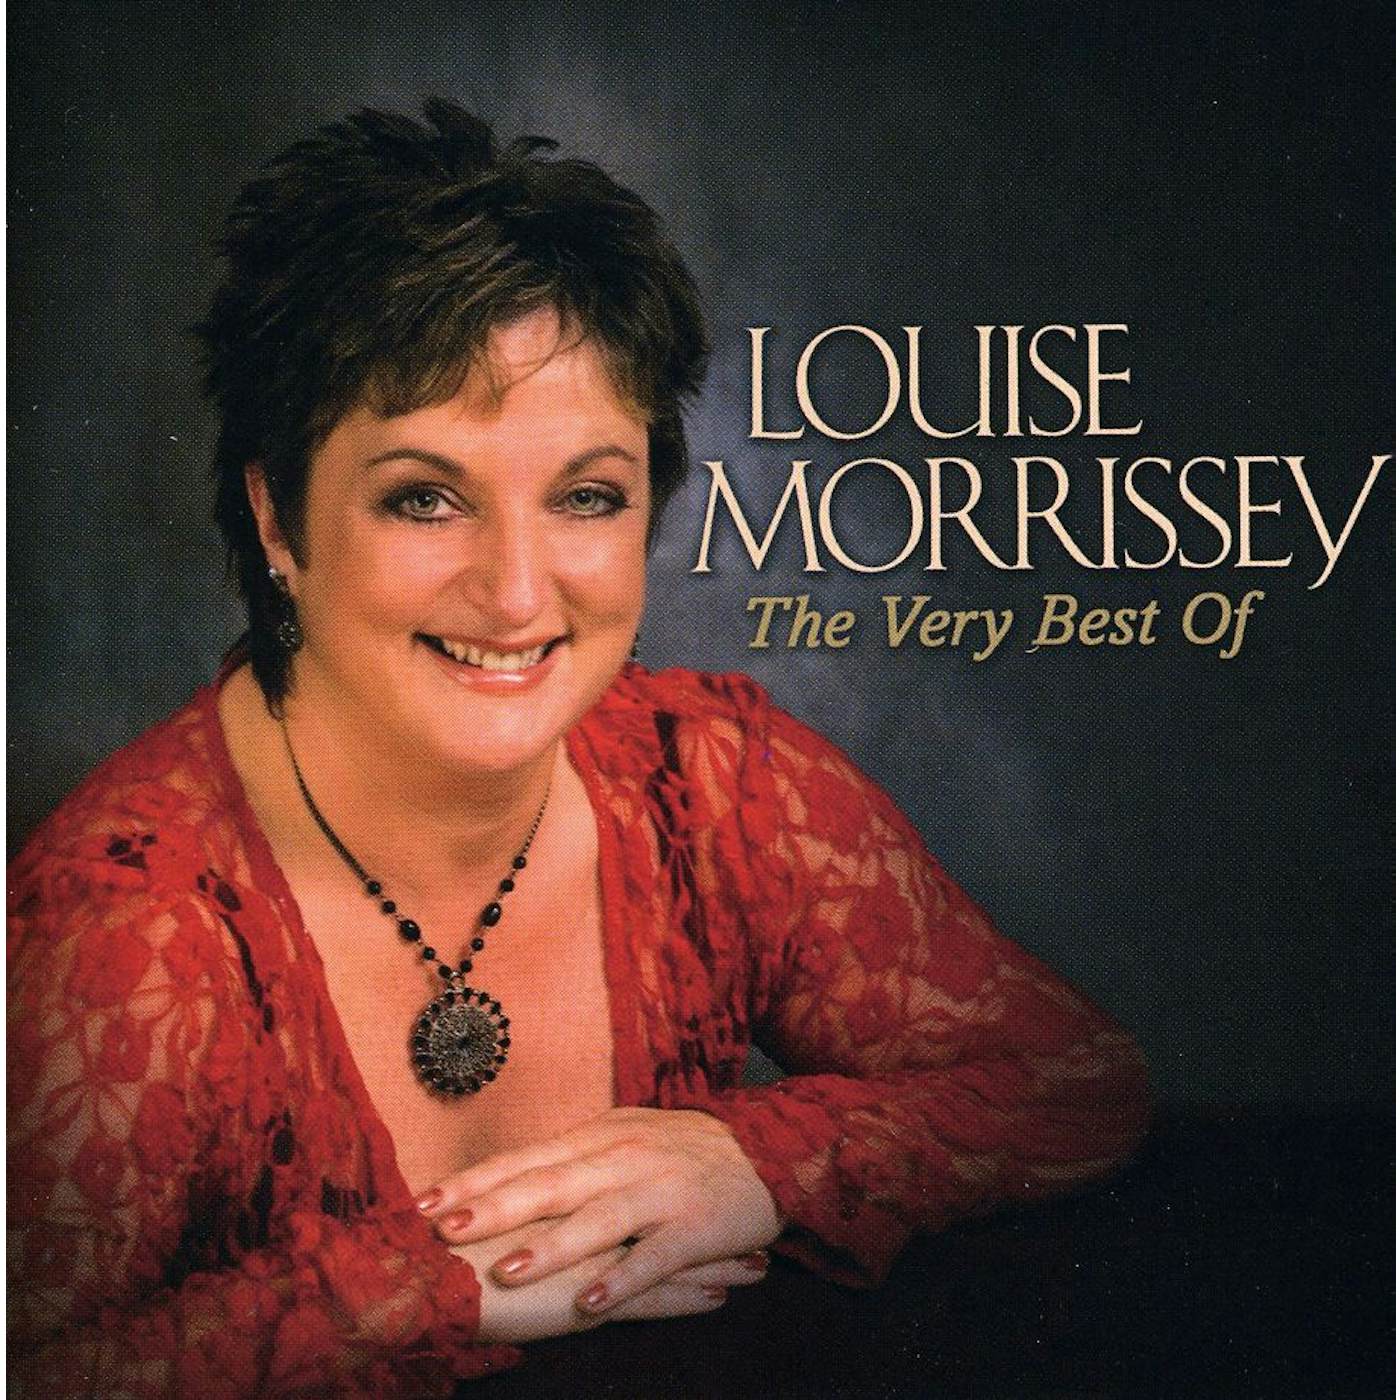 VERY BST OF LOUISE MORRISSEY CD